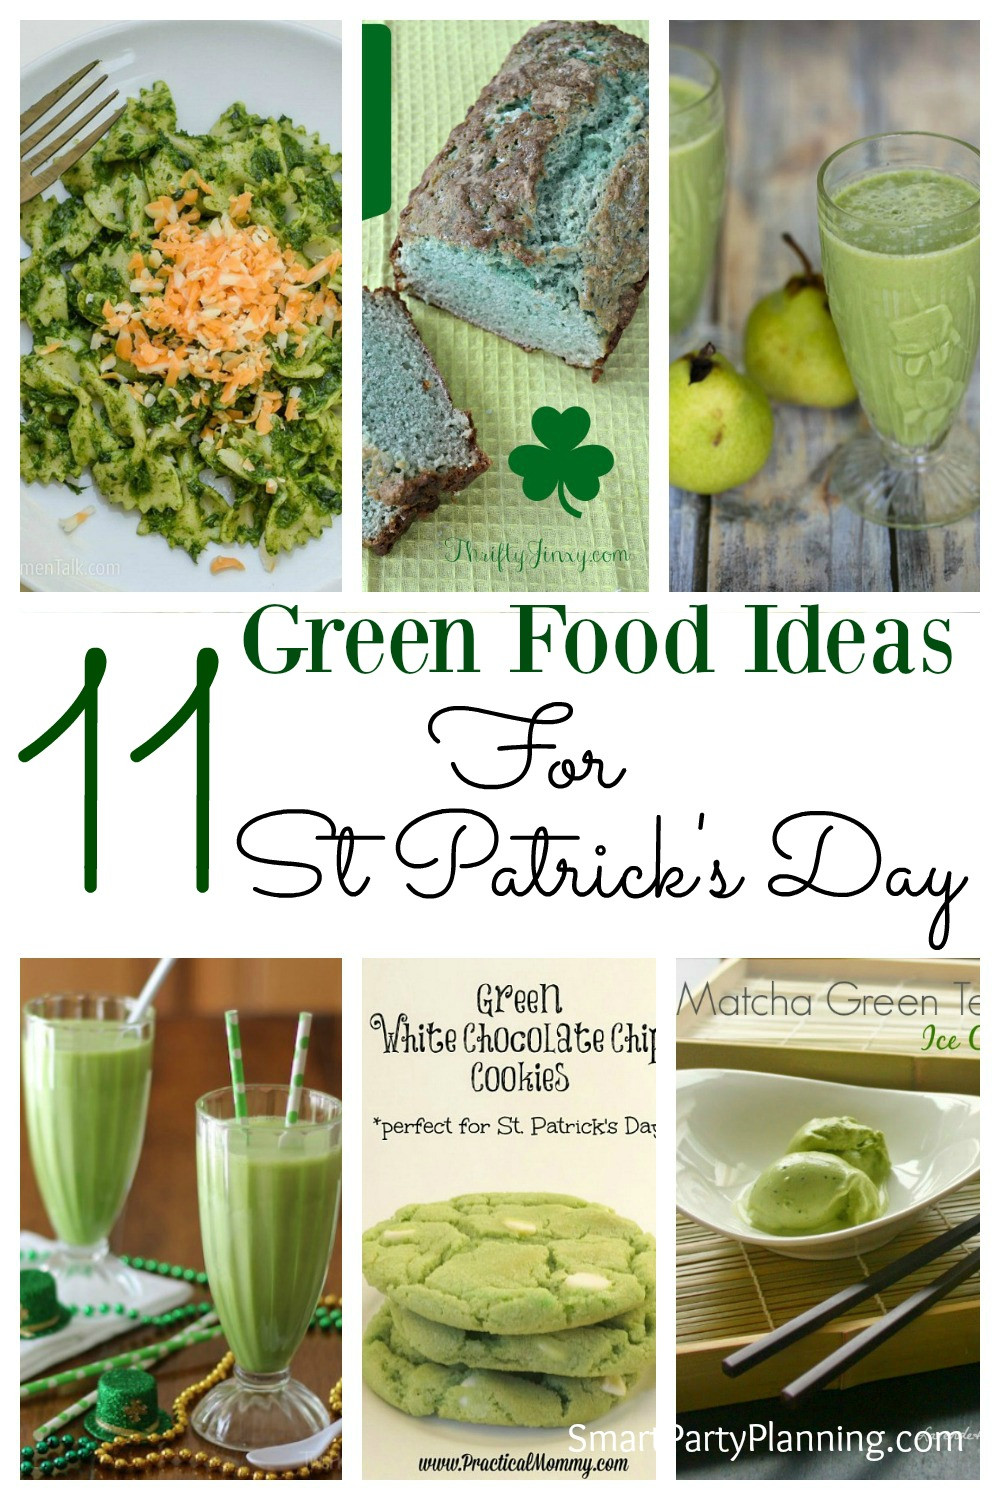 St Patrick's Day Menu Ideas
 11 Green Food Ideas For St Patrick s Day